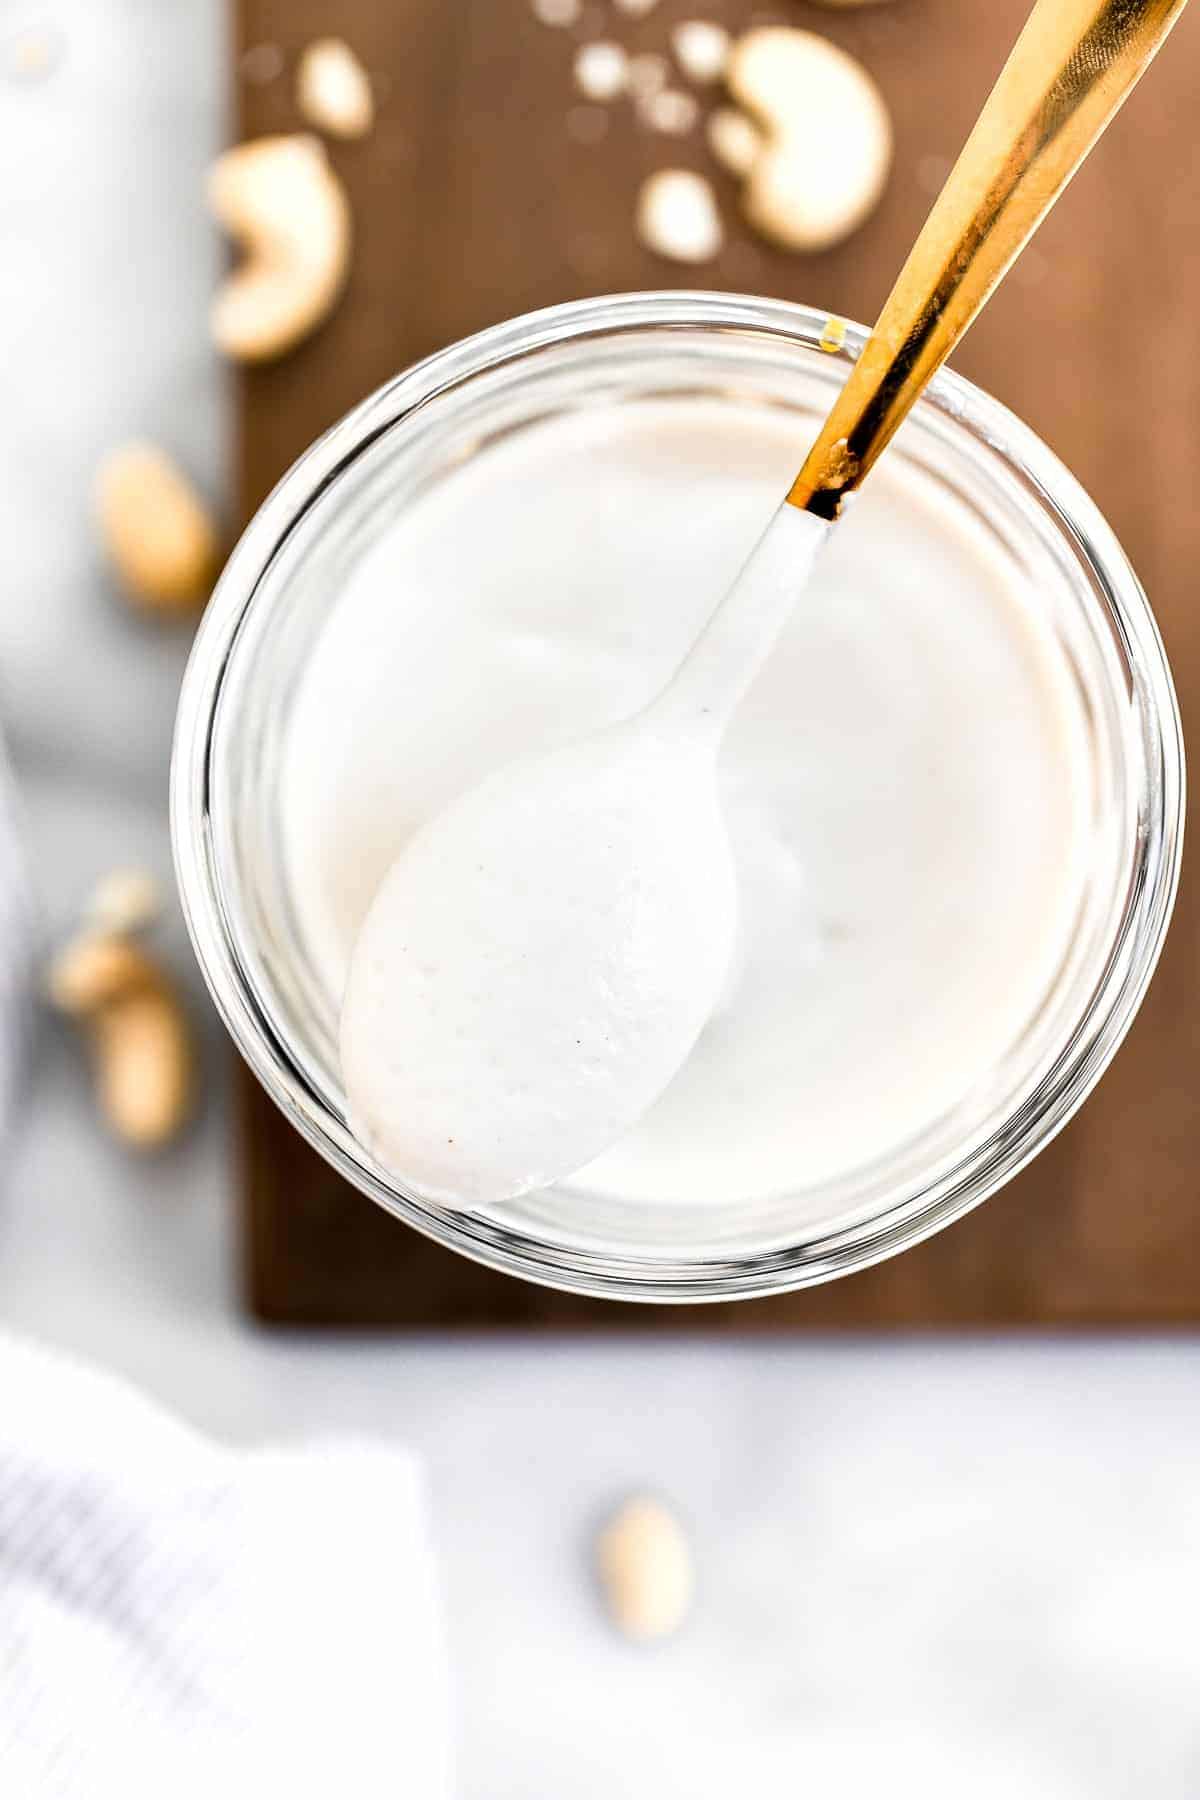 Cashew cream in a jar with a gold spoon sitting on top.